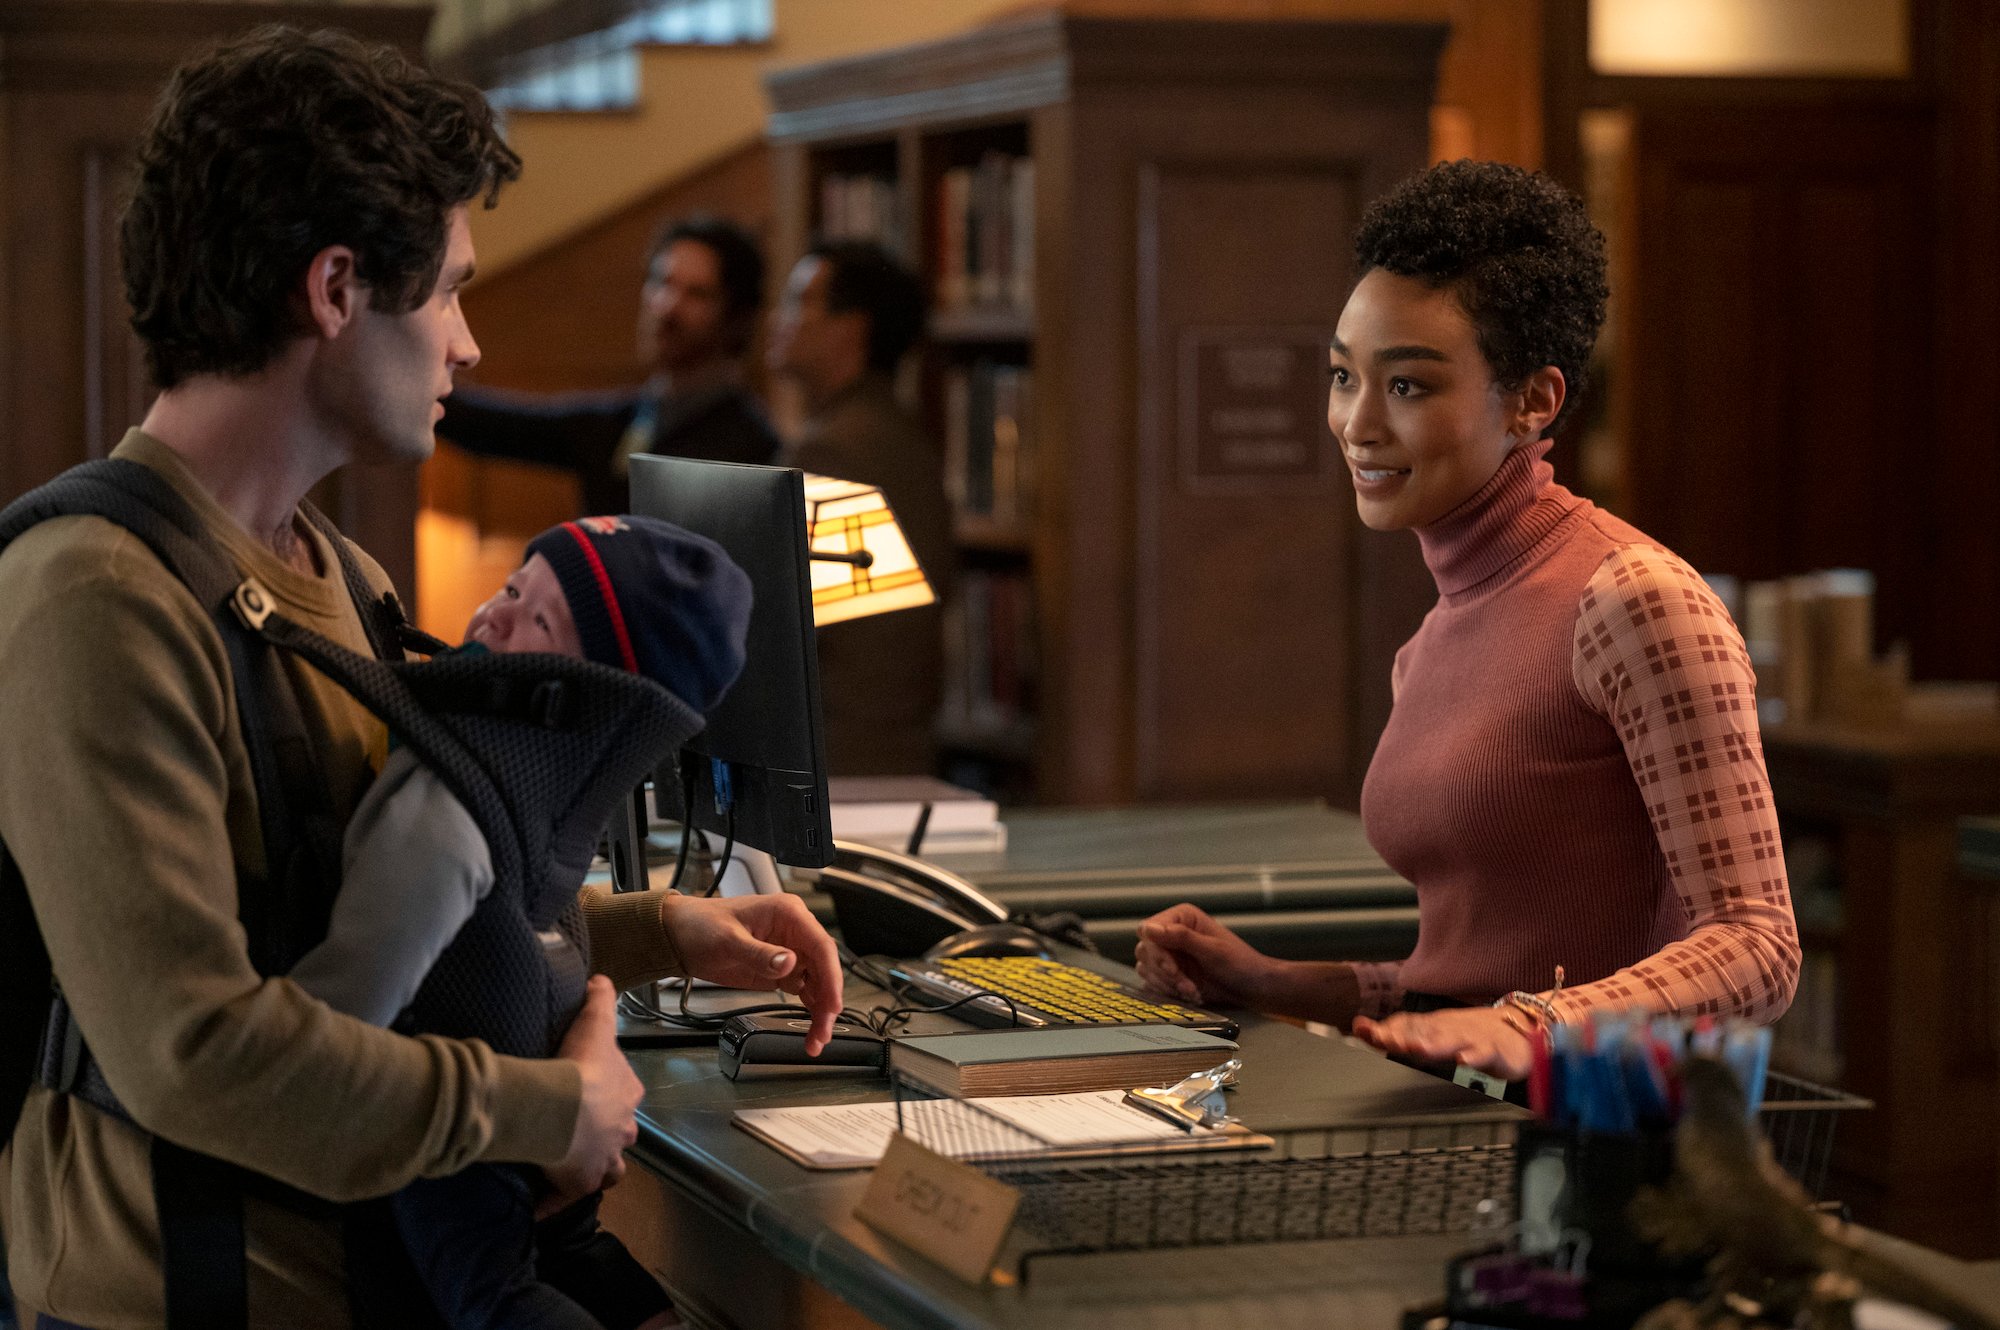 ‘You’ Star Tati Gabrielle Describes ‘Chilling’ Moment Filming With Penn Badgley